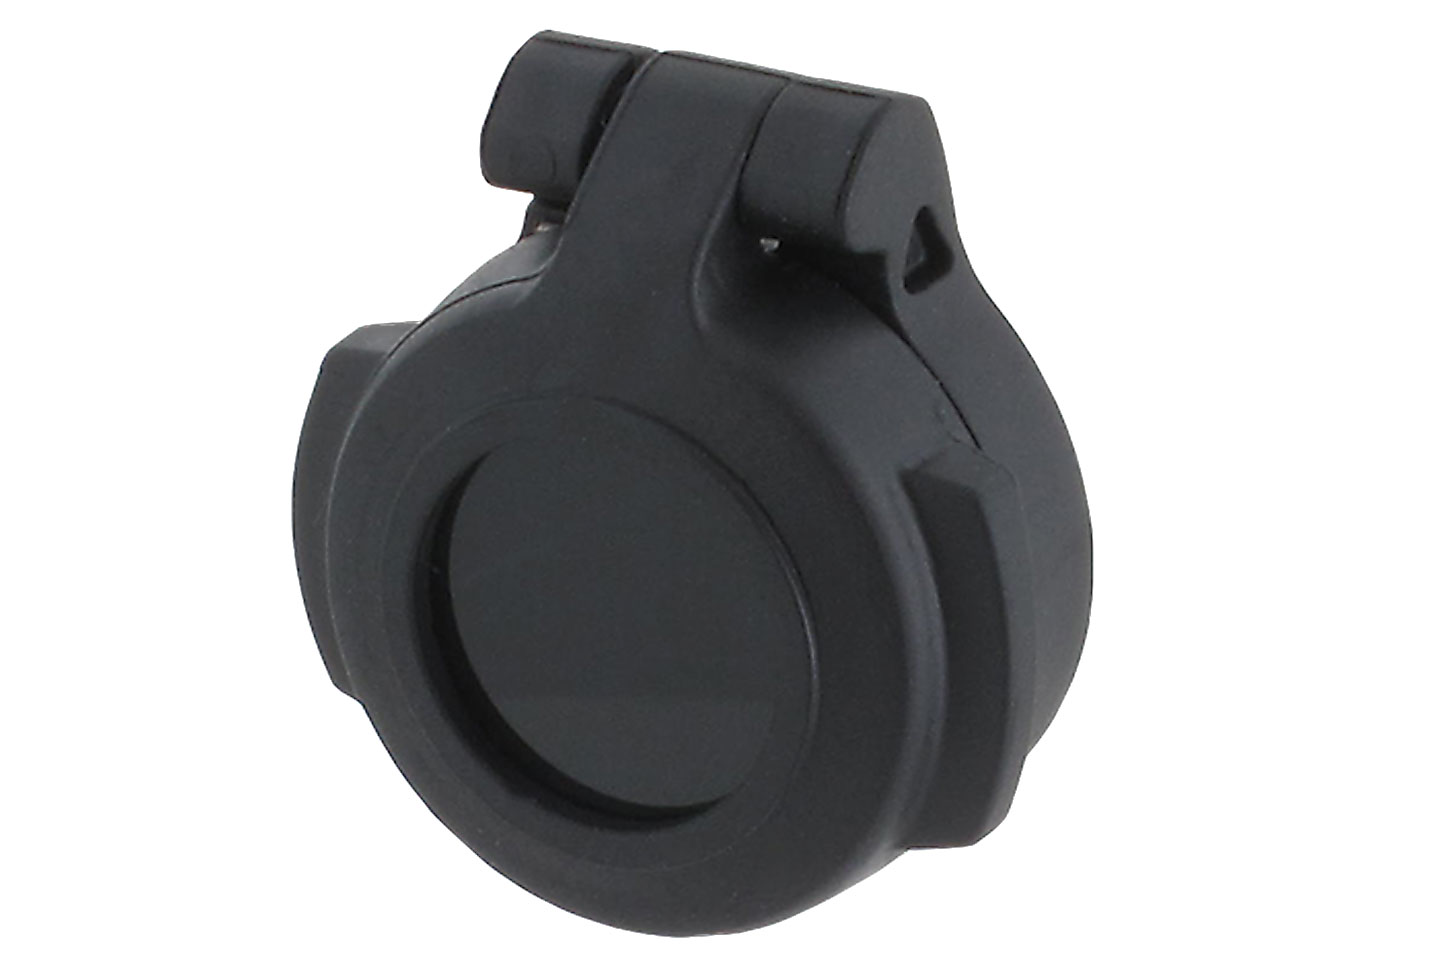 MicroT-2 / CompM5 Rear Lens Cover